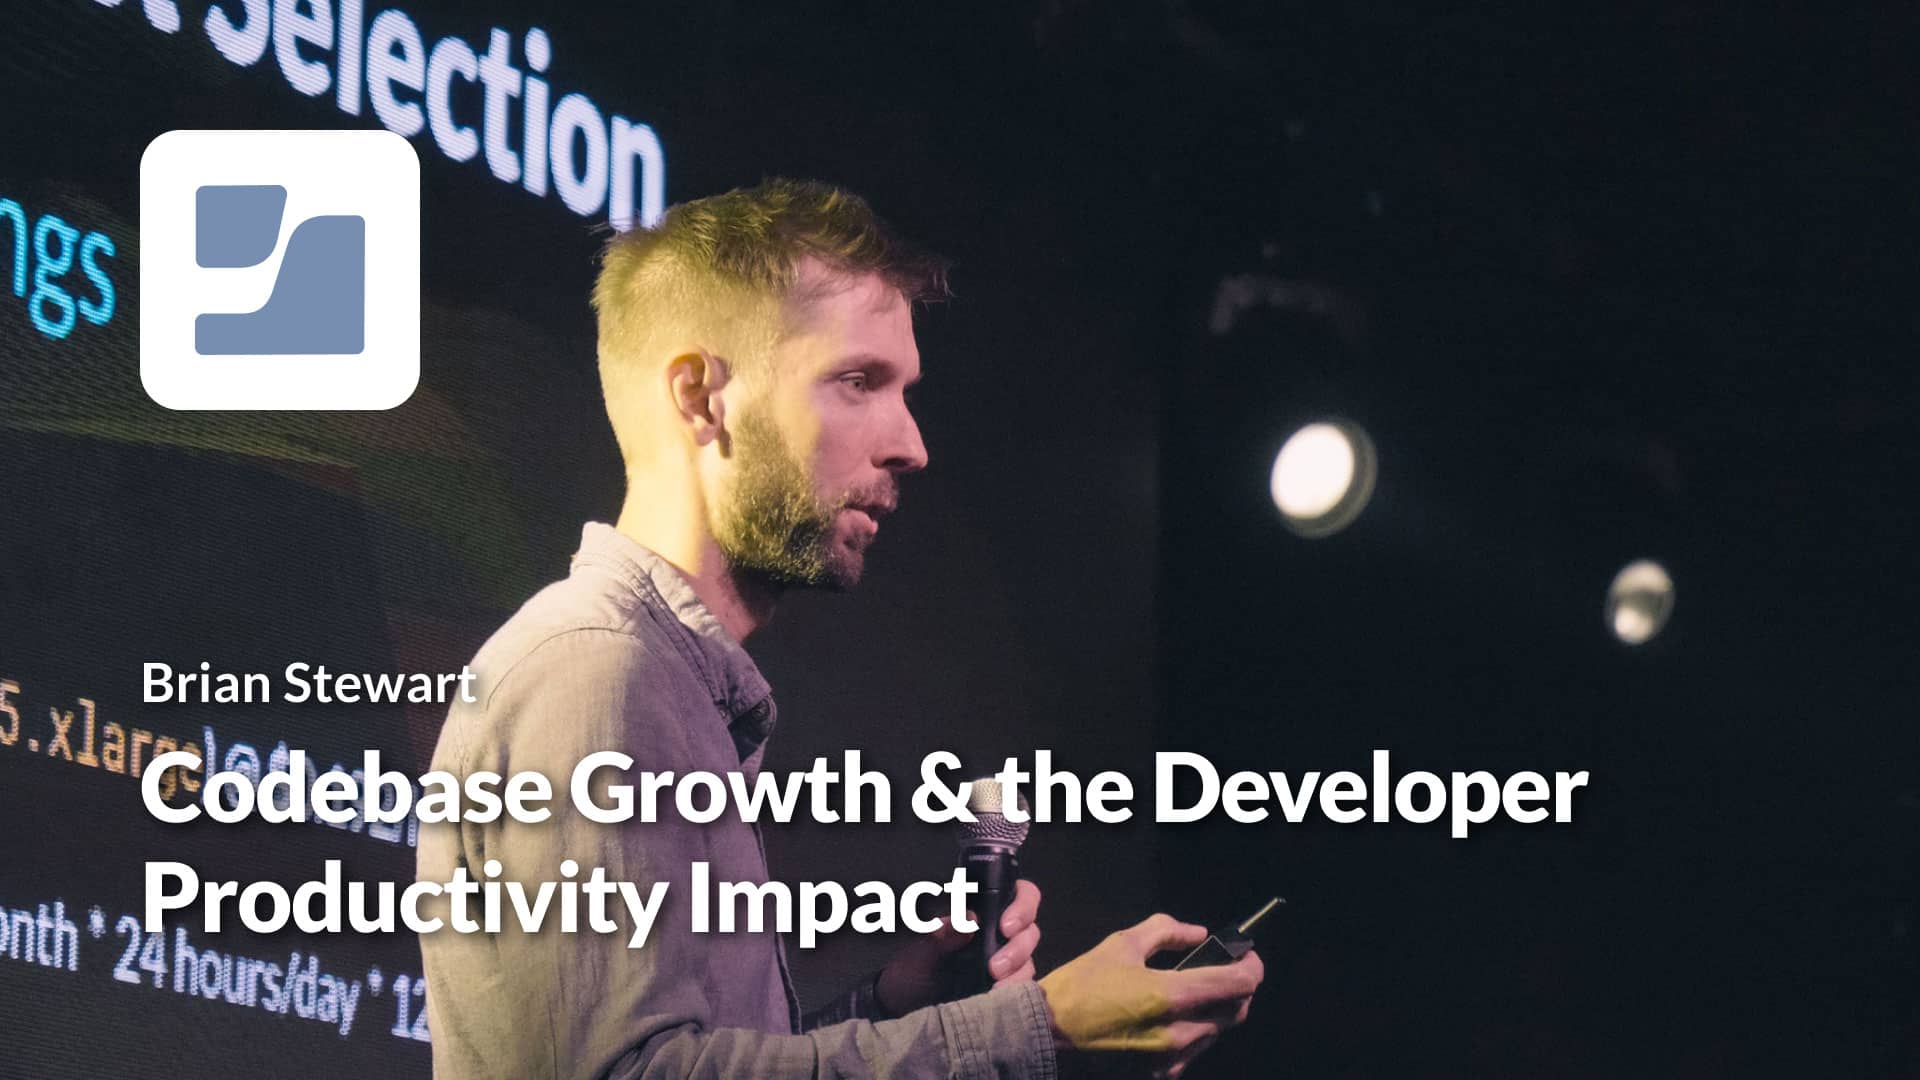 Codebase Growth and the Developer Productivity Impact